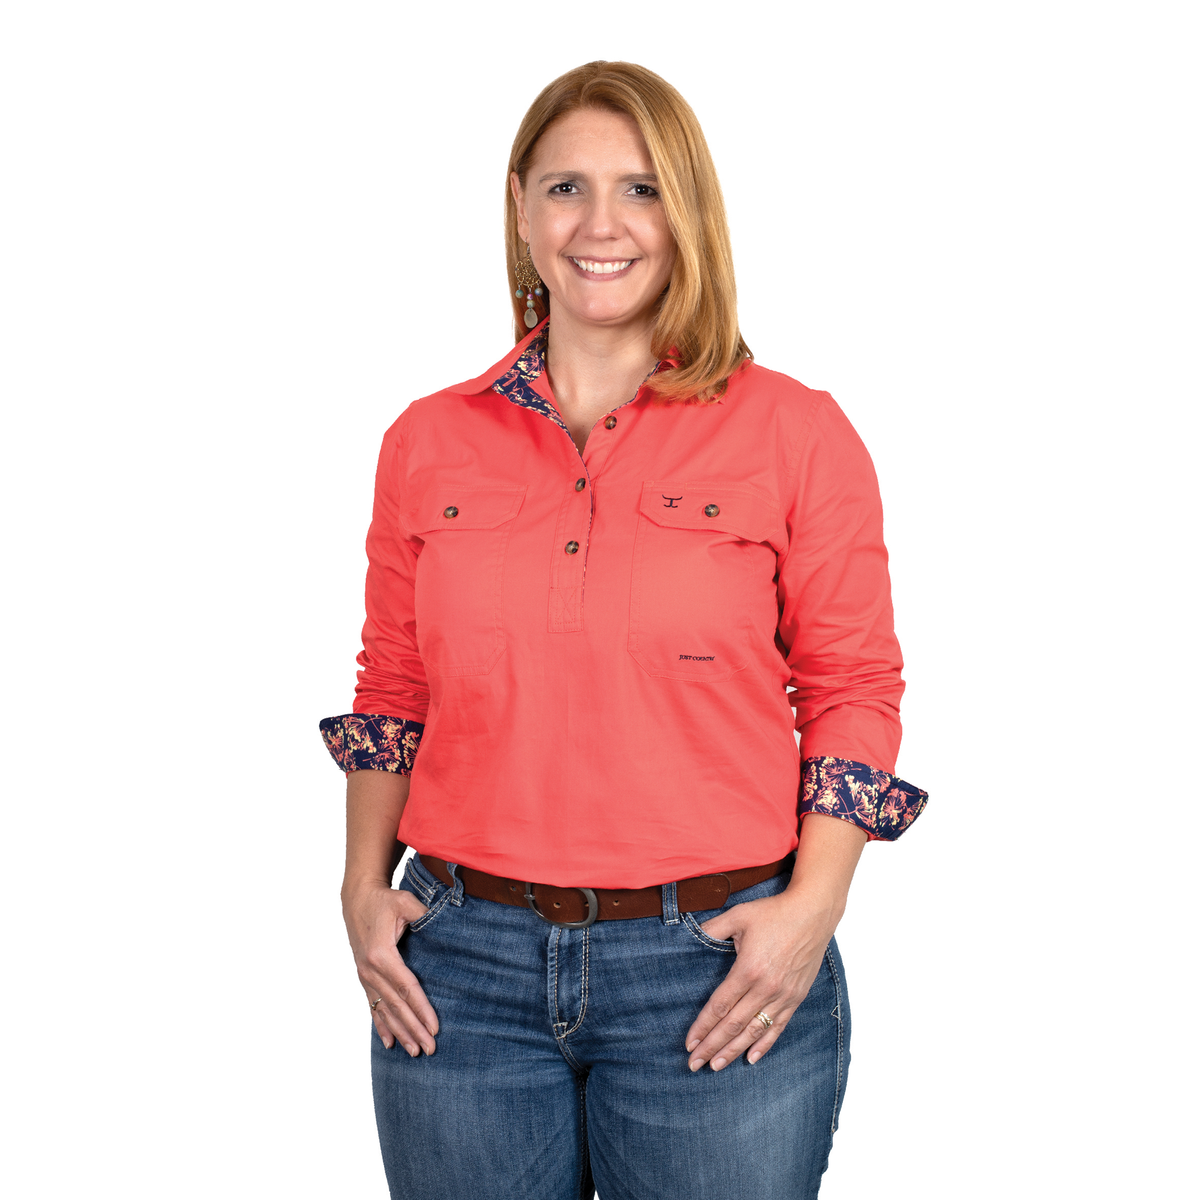 Just Country Jahna Trim Half Button Shirt - Hot Coral/Navy Dandelions